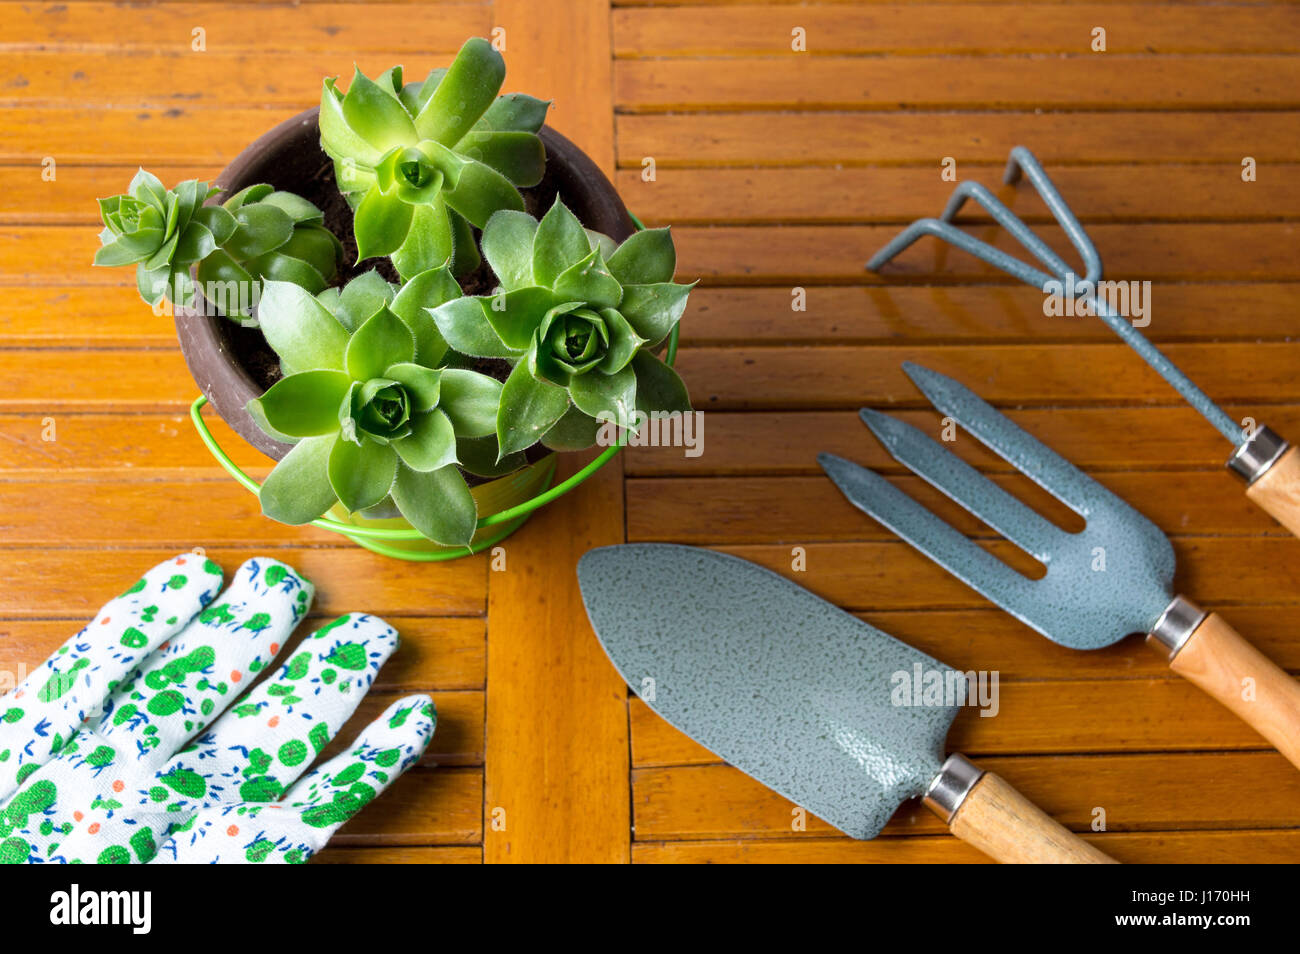 Gardening tools and potted houseleek plant on a table Stock Photo